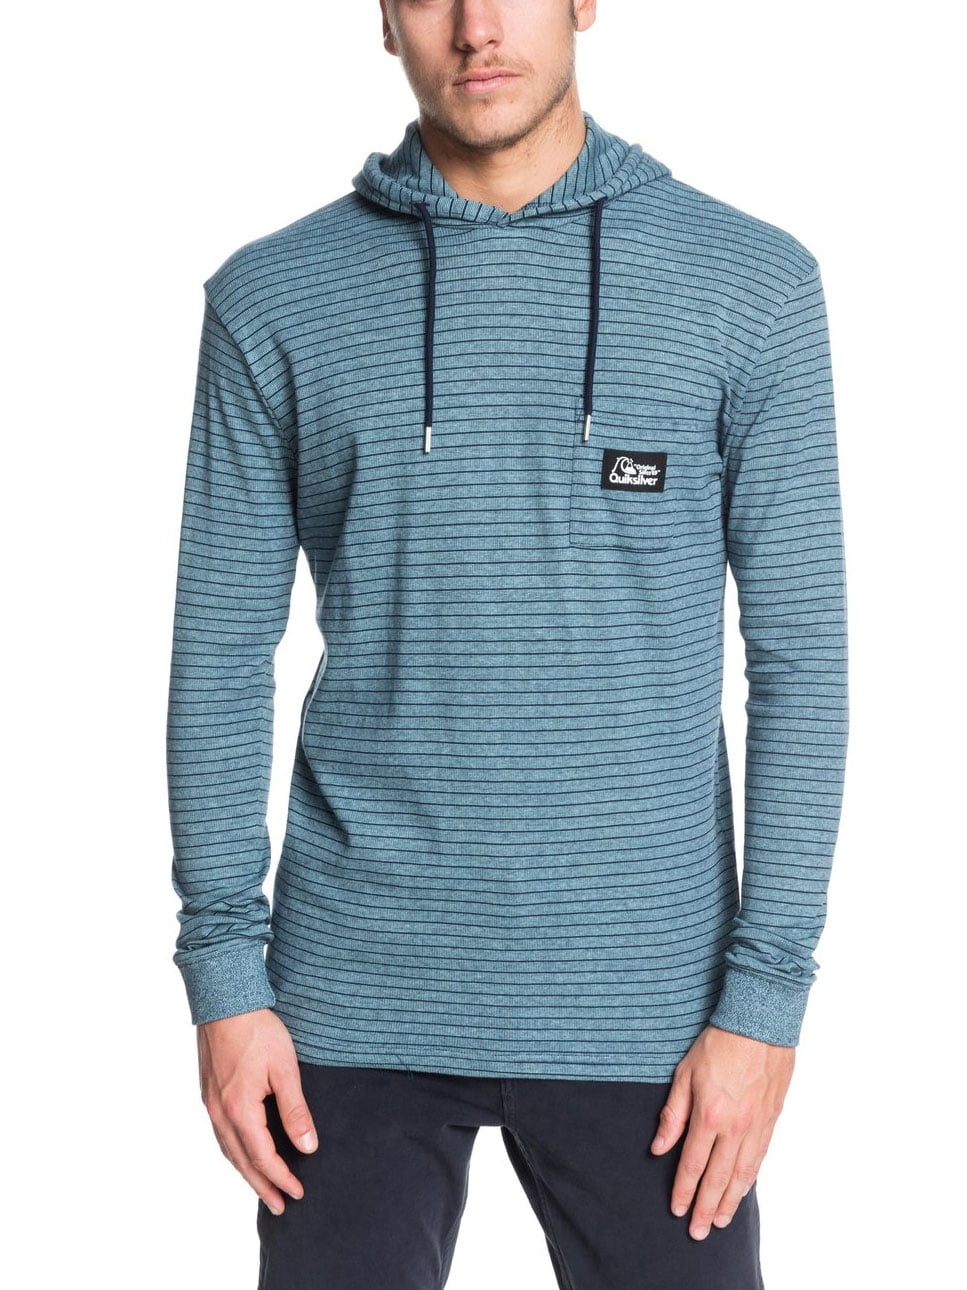 Quiksilver Mens Cold March 